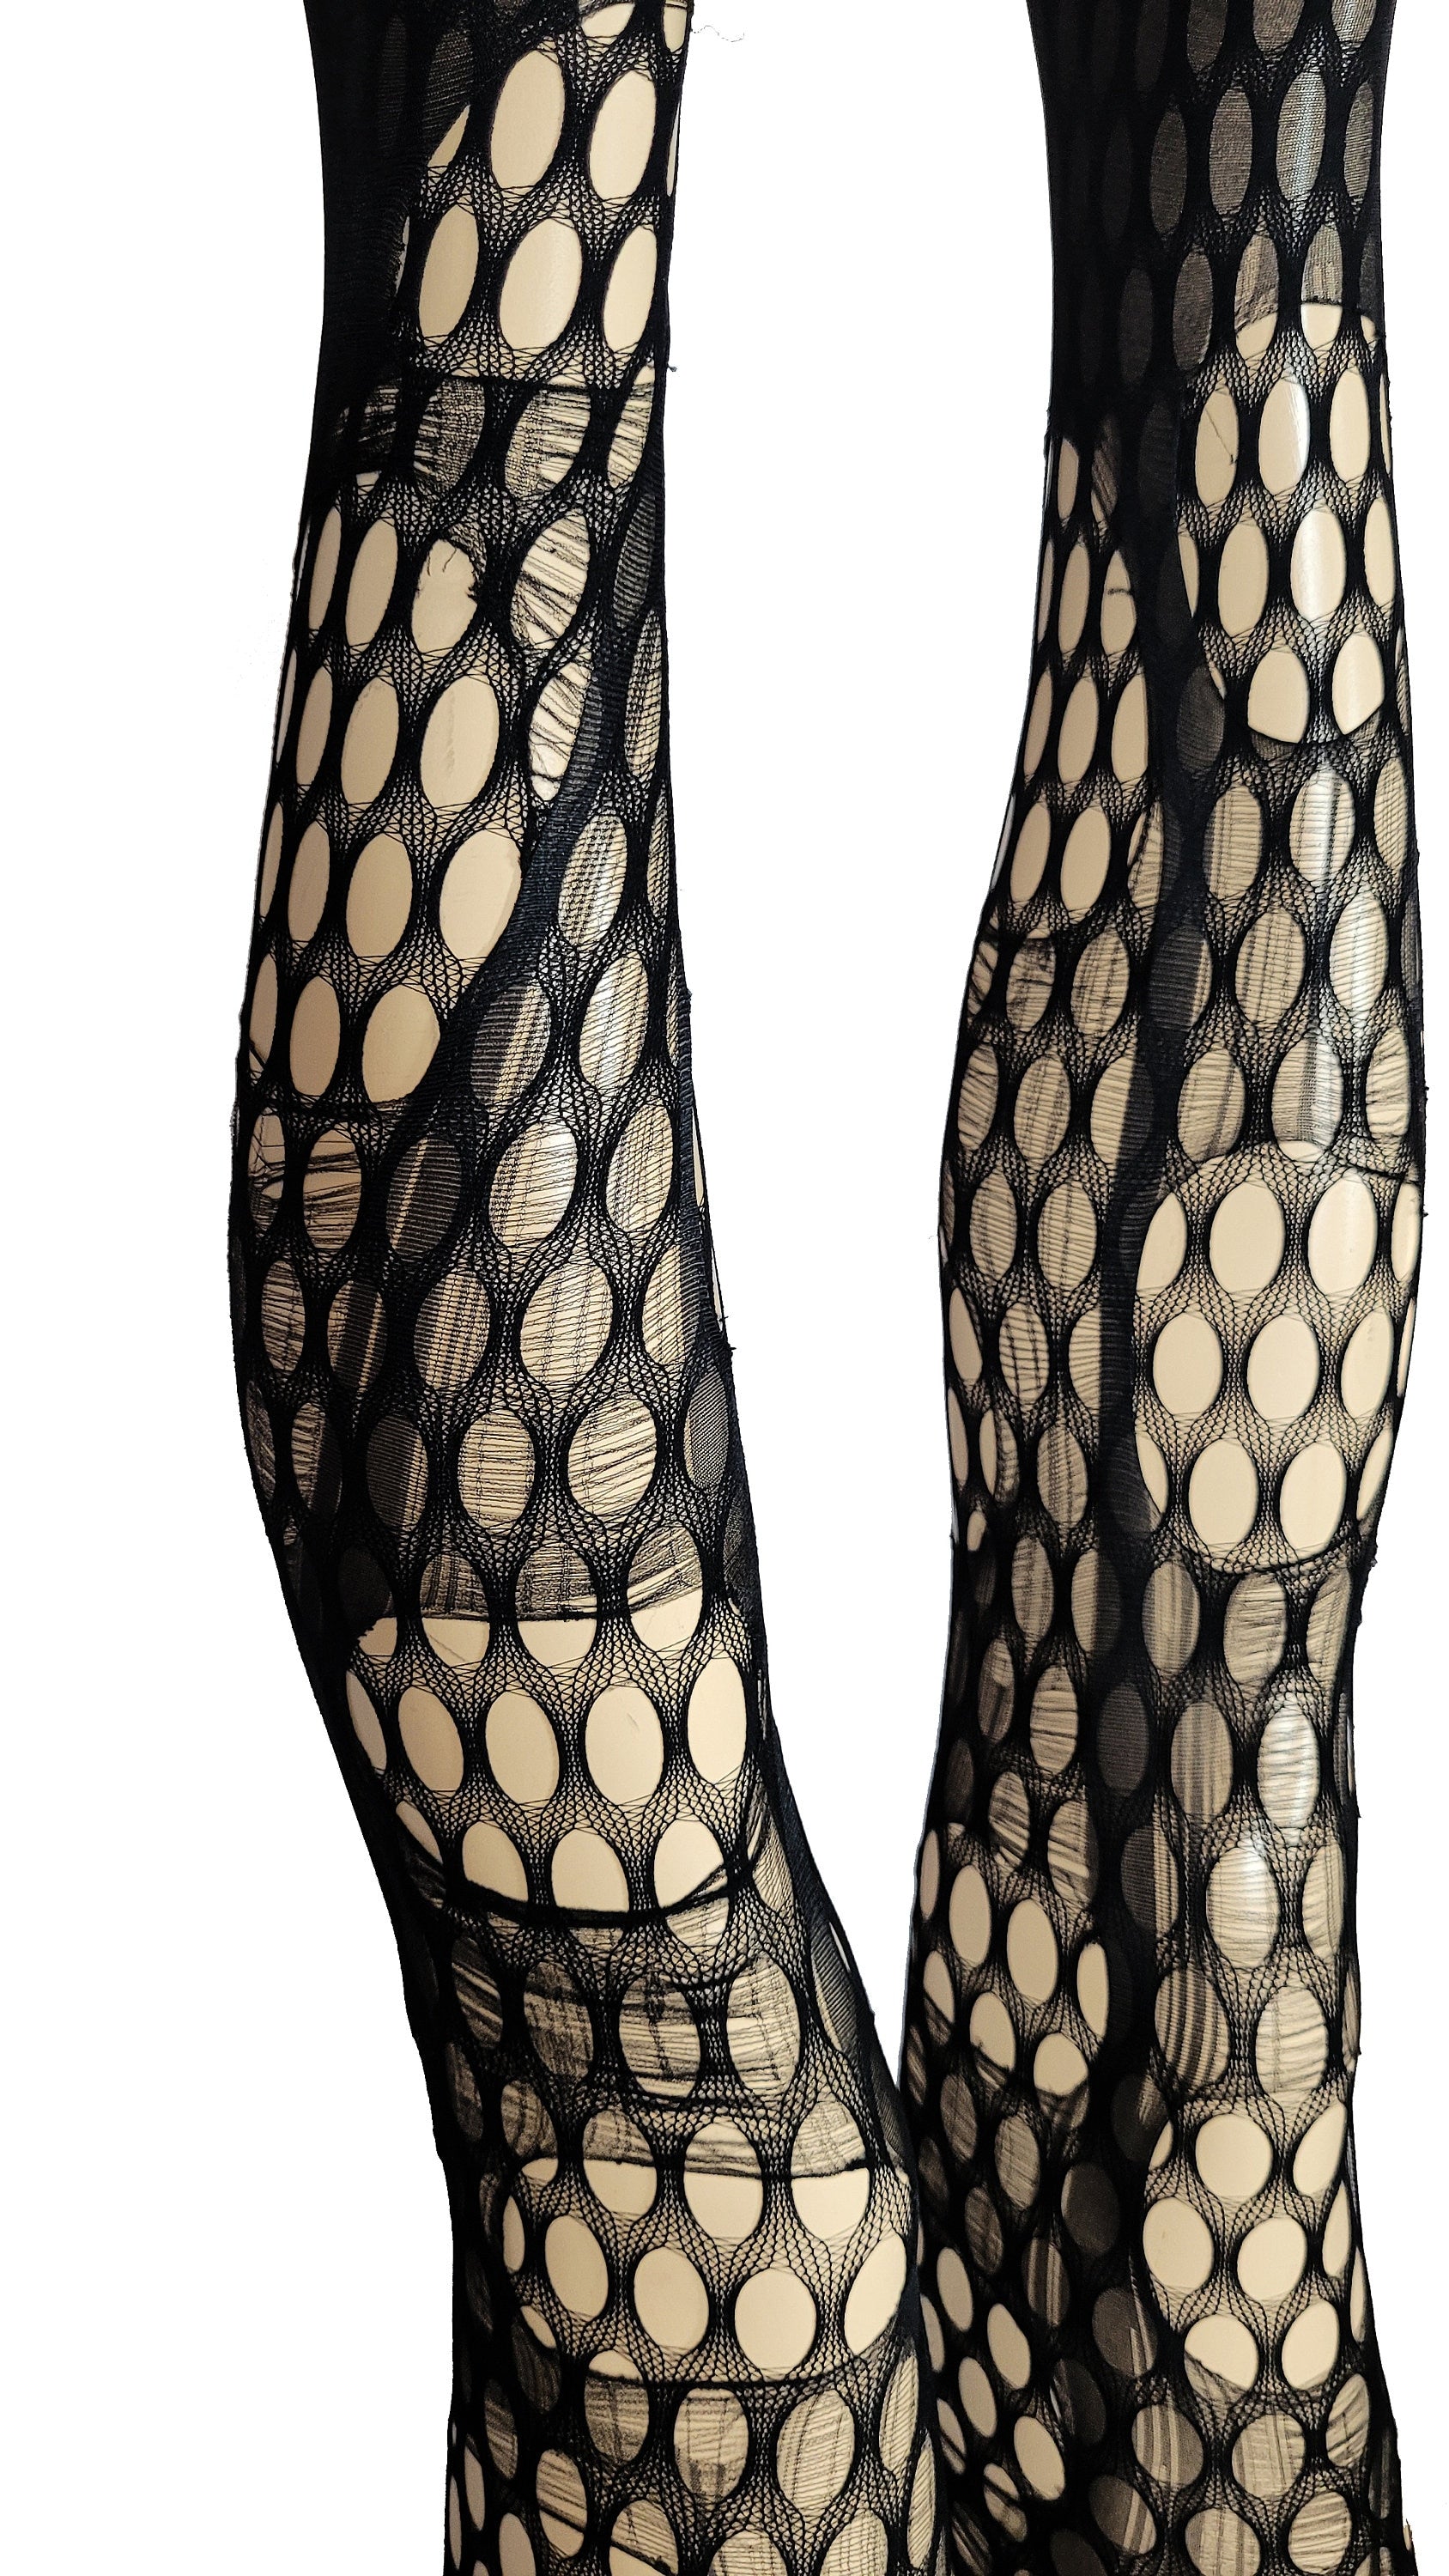 Large Open Fishnet Tights